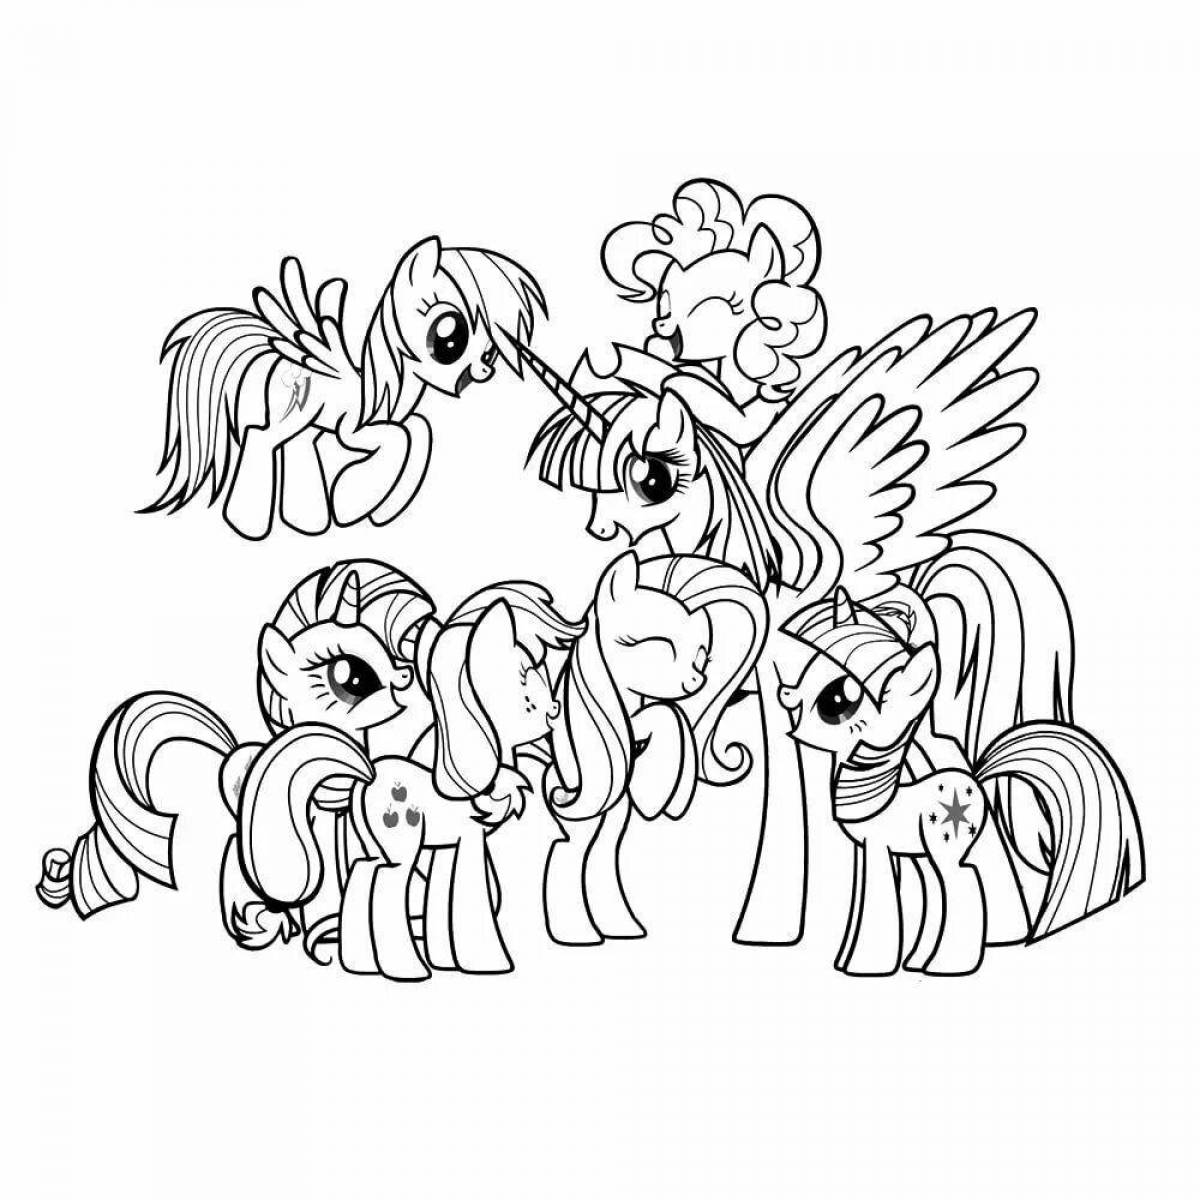 May little pony coloring page #5